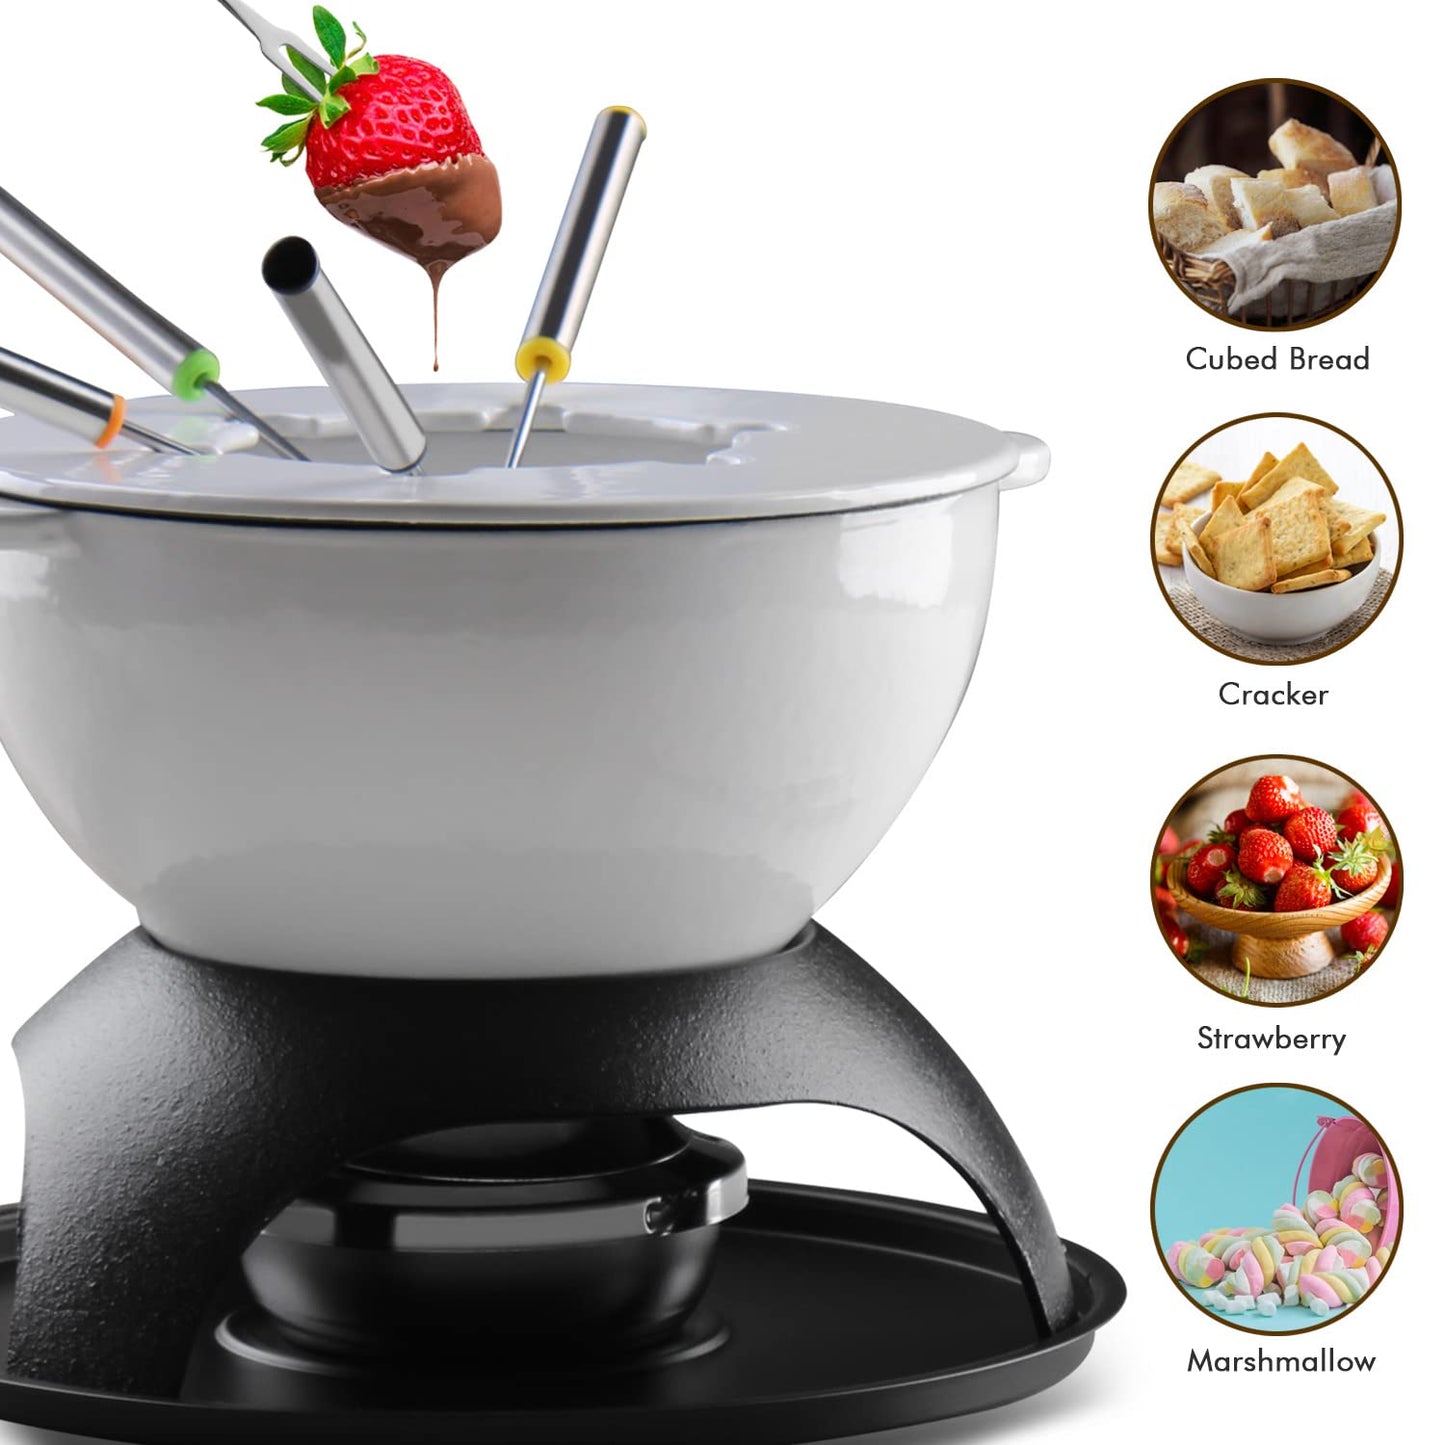 Artestia 11-Piece Cast Iron Fondue Set with Adjustable Burner 6 Colored Forks, 5-Cup White Cheese Fondue Pot for Chocolate, Meat, 4-6 Person